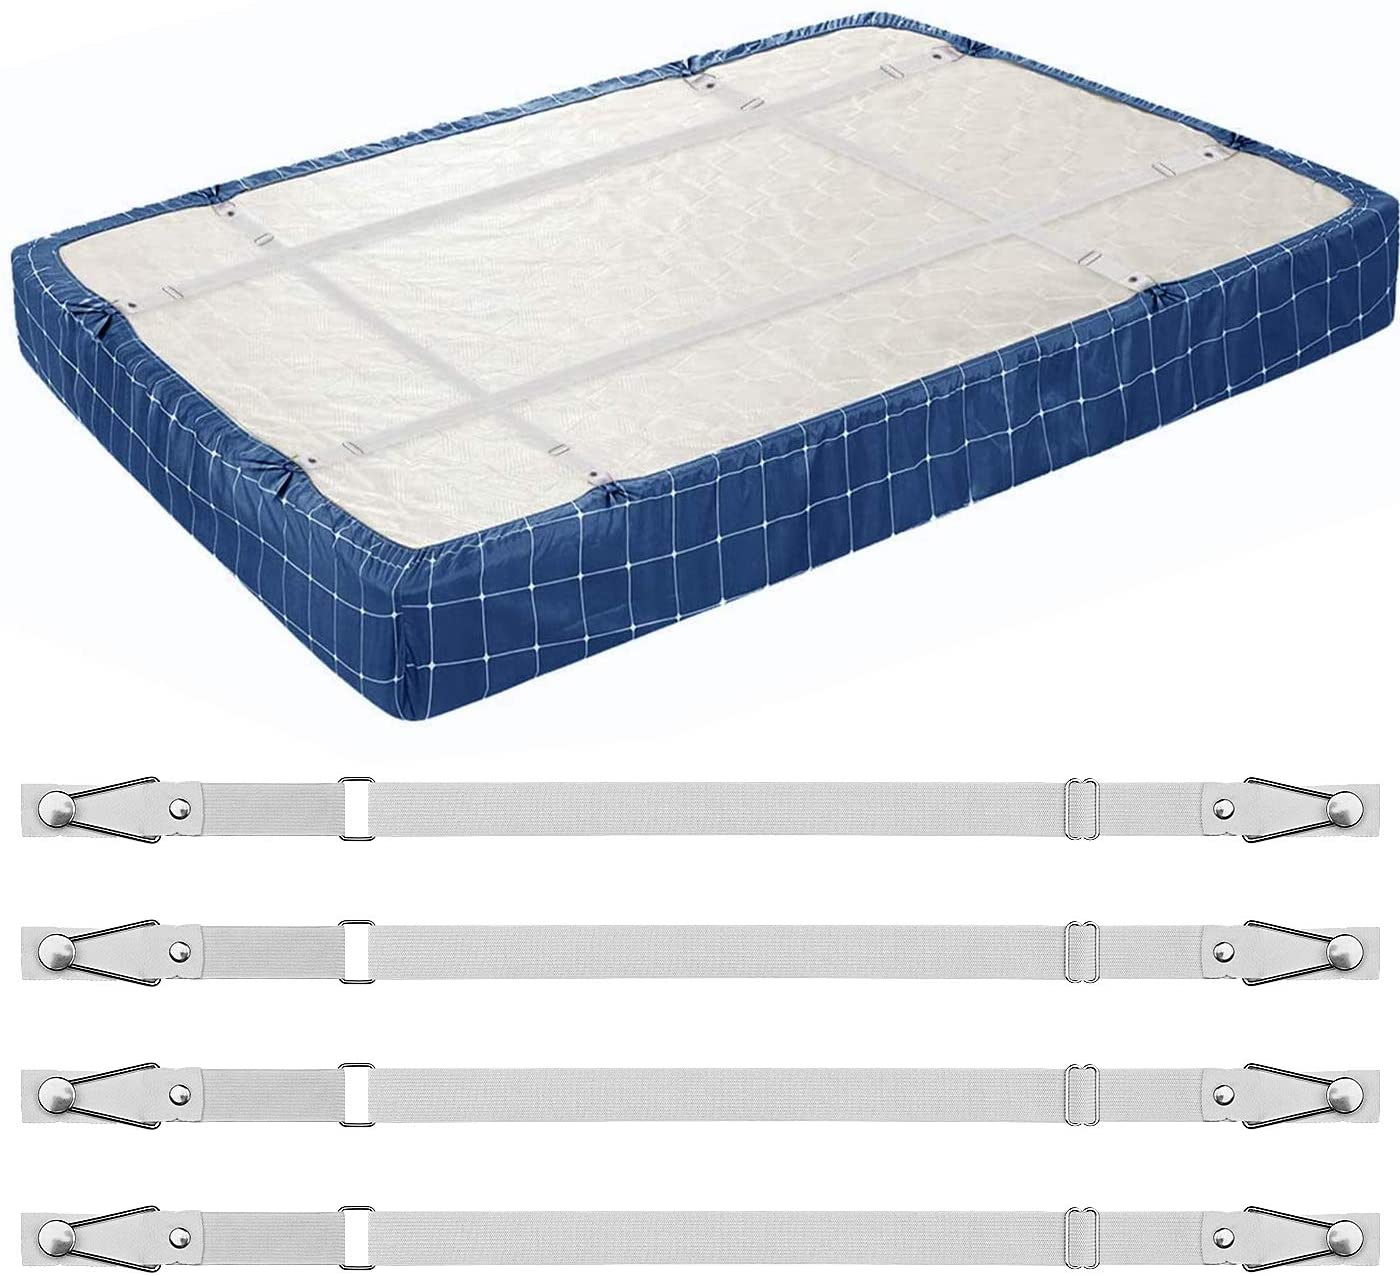 You can secure a mattress to a murphy bed with mattress straps. Also use mattress straps to secure the cover.